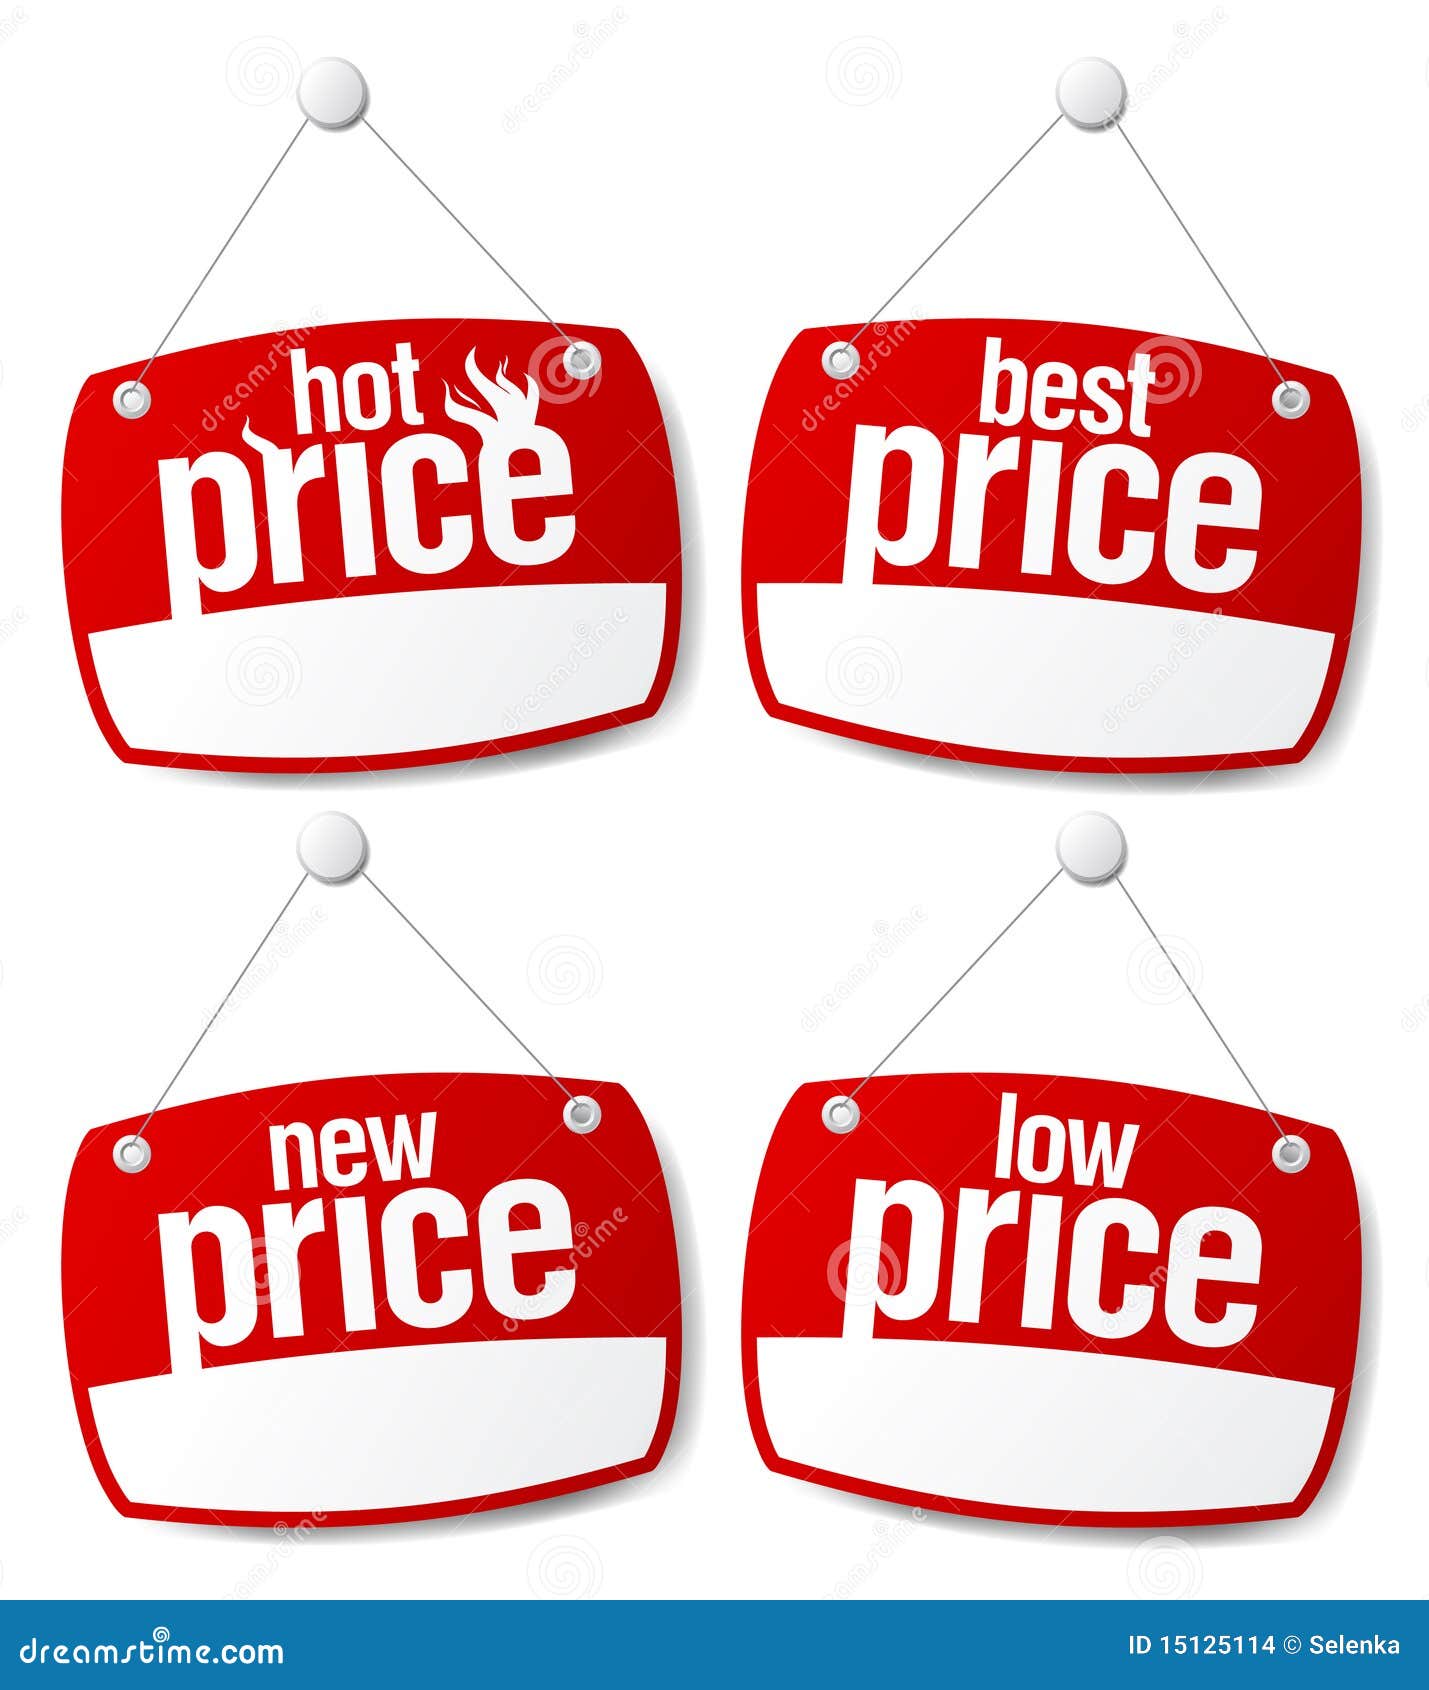 best price signs